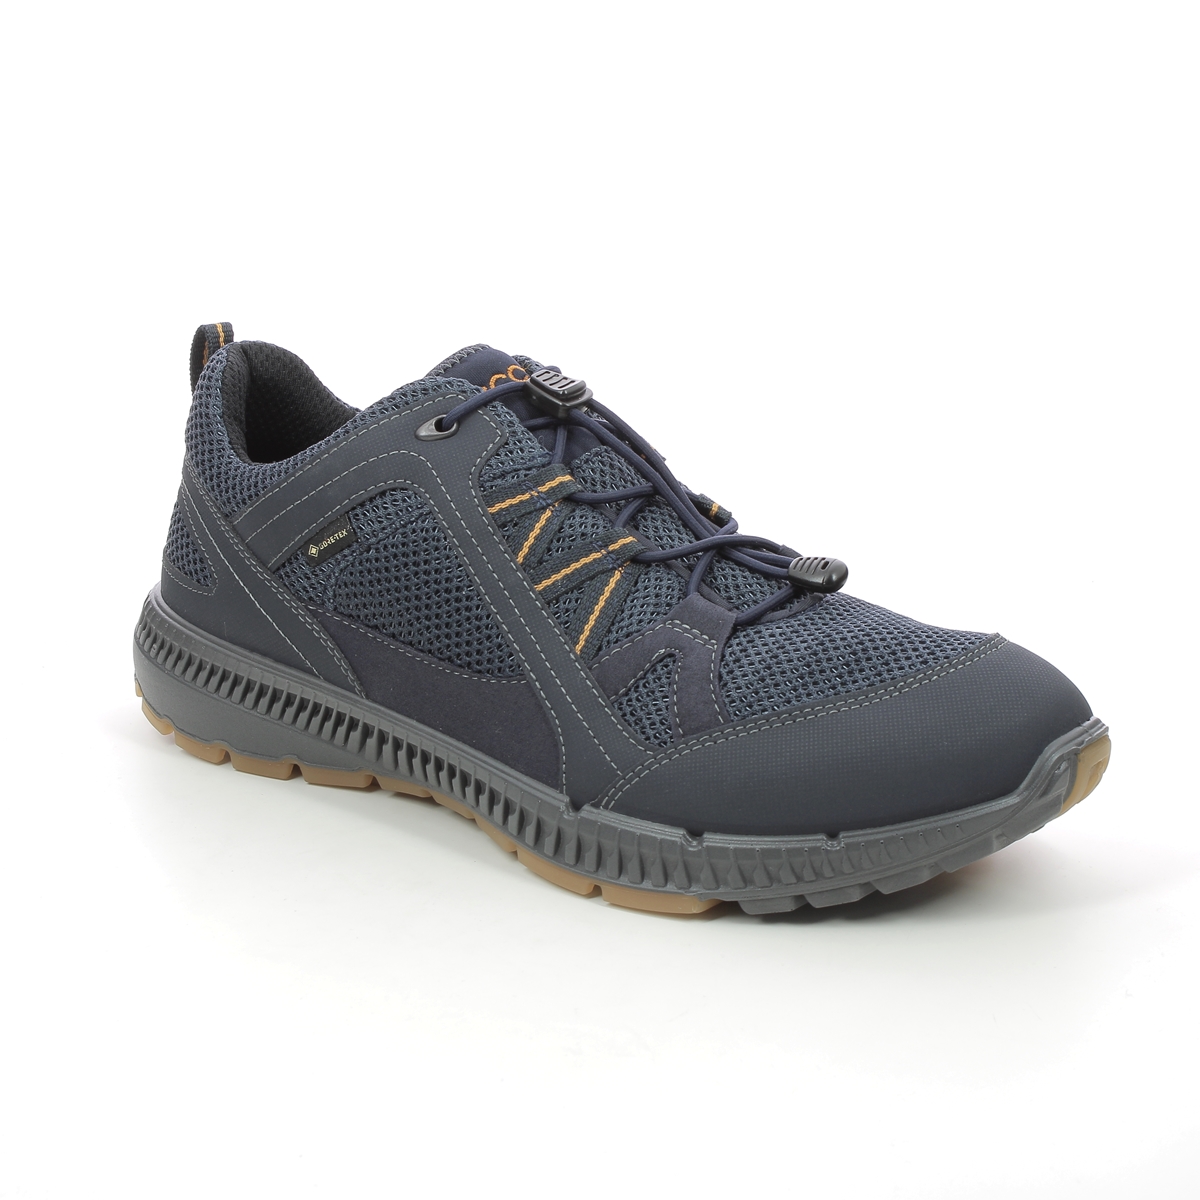 ECCO Terracruise Gtx Navy Mens trainers 843064-51241 in a Plain Man-made in Size 46